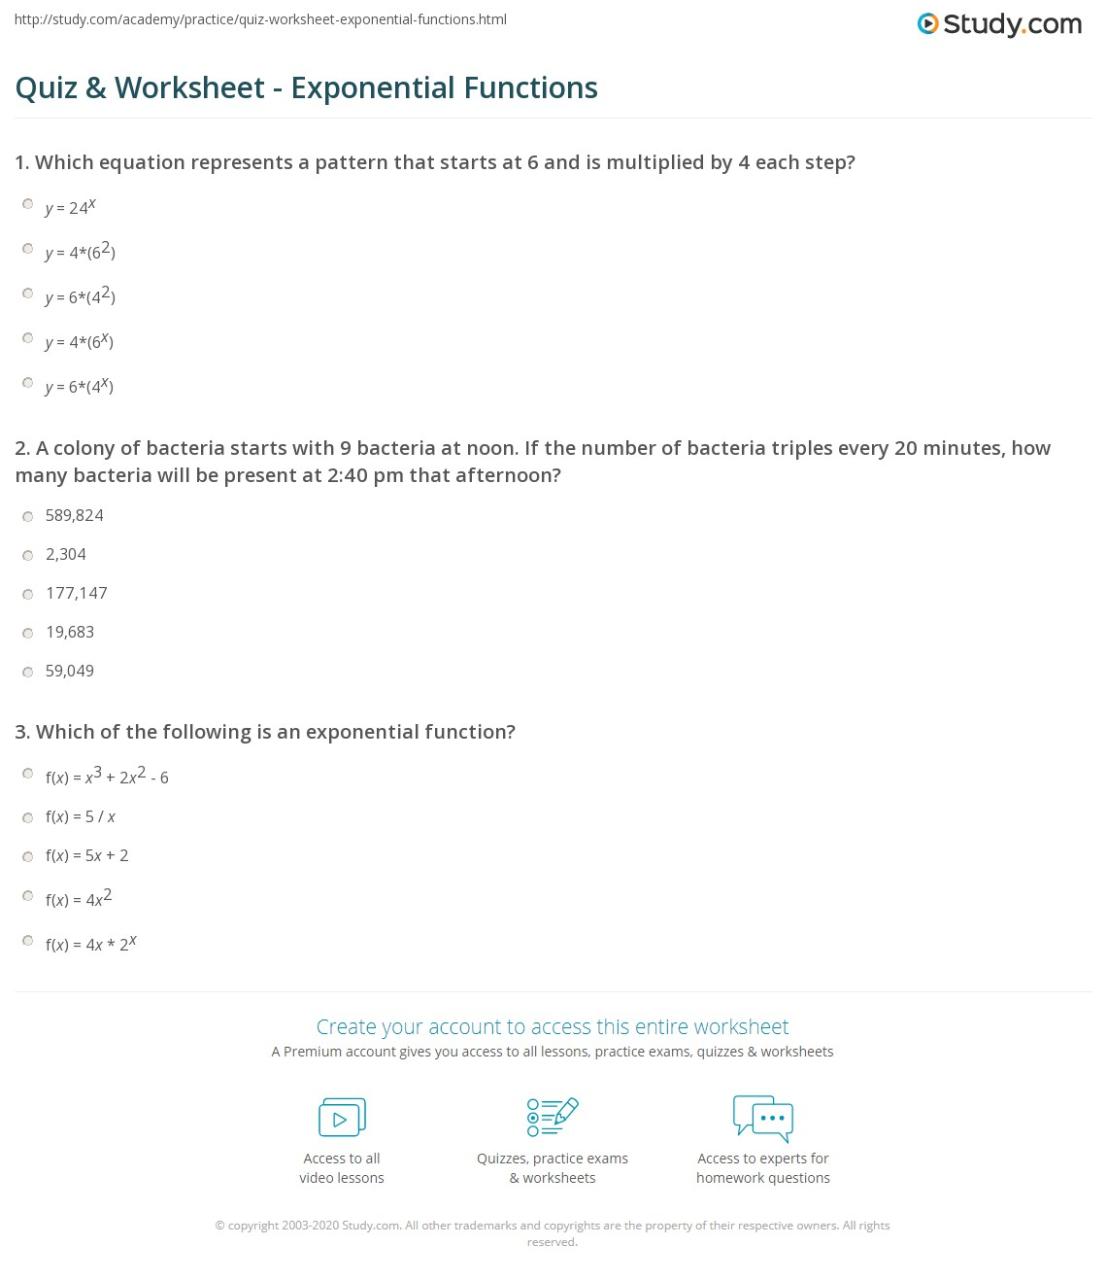 Worksheet A Exponential Functions Nidecmege